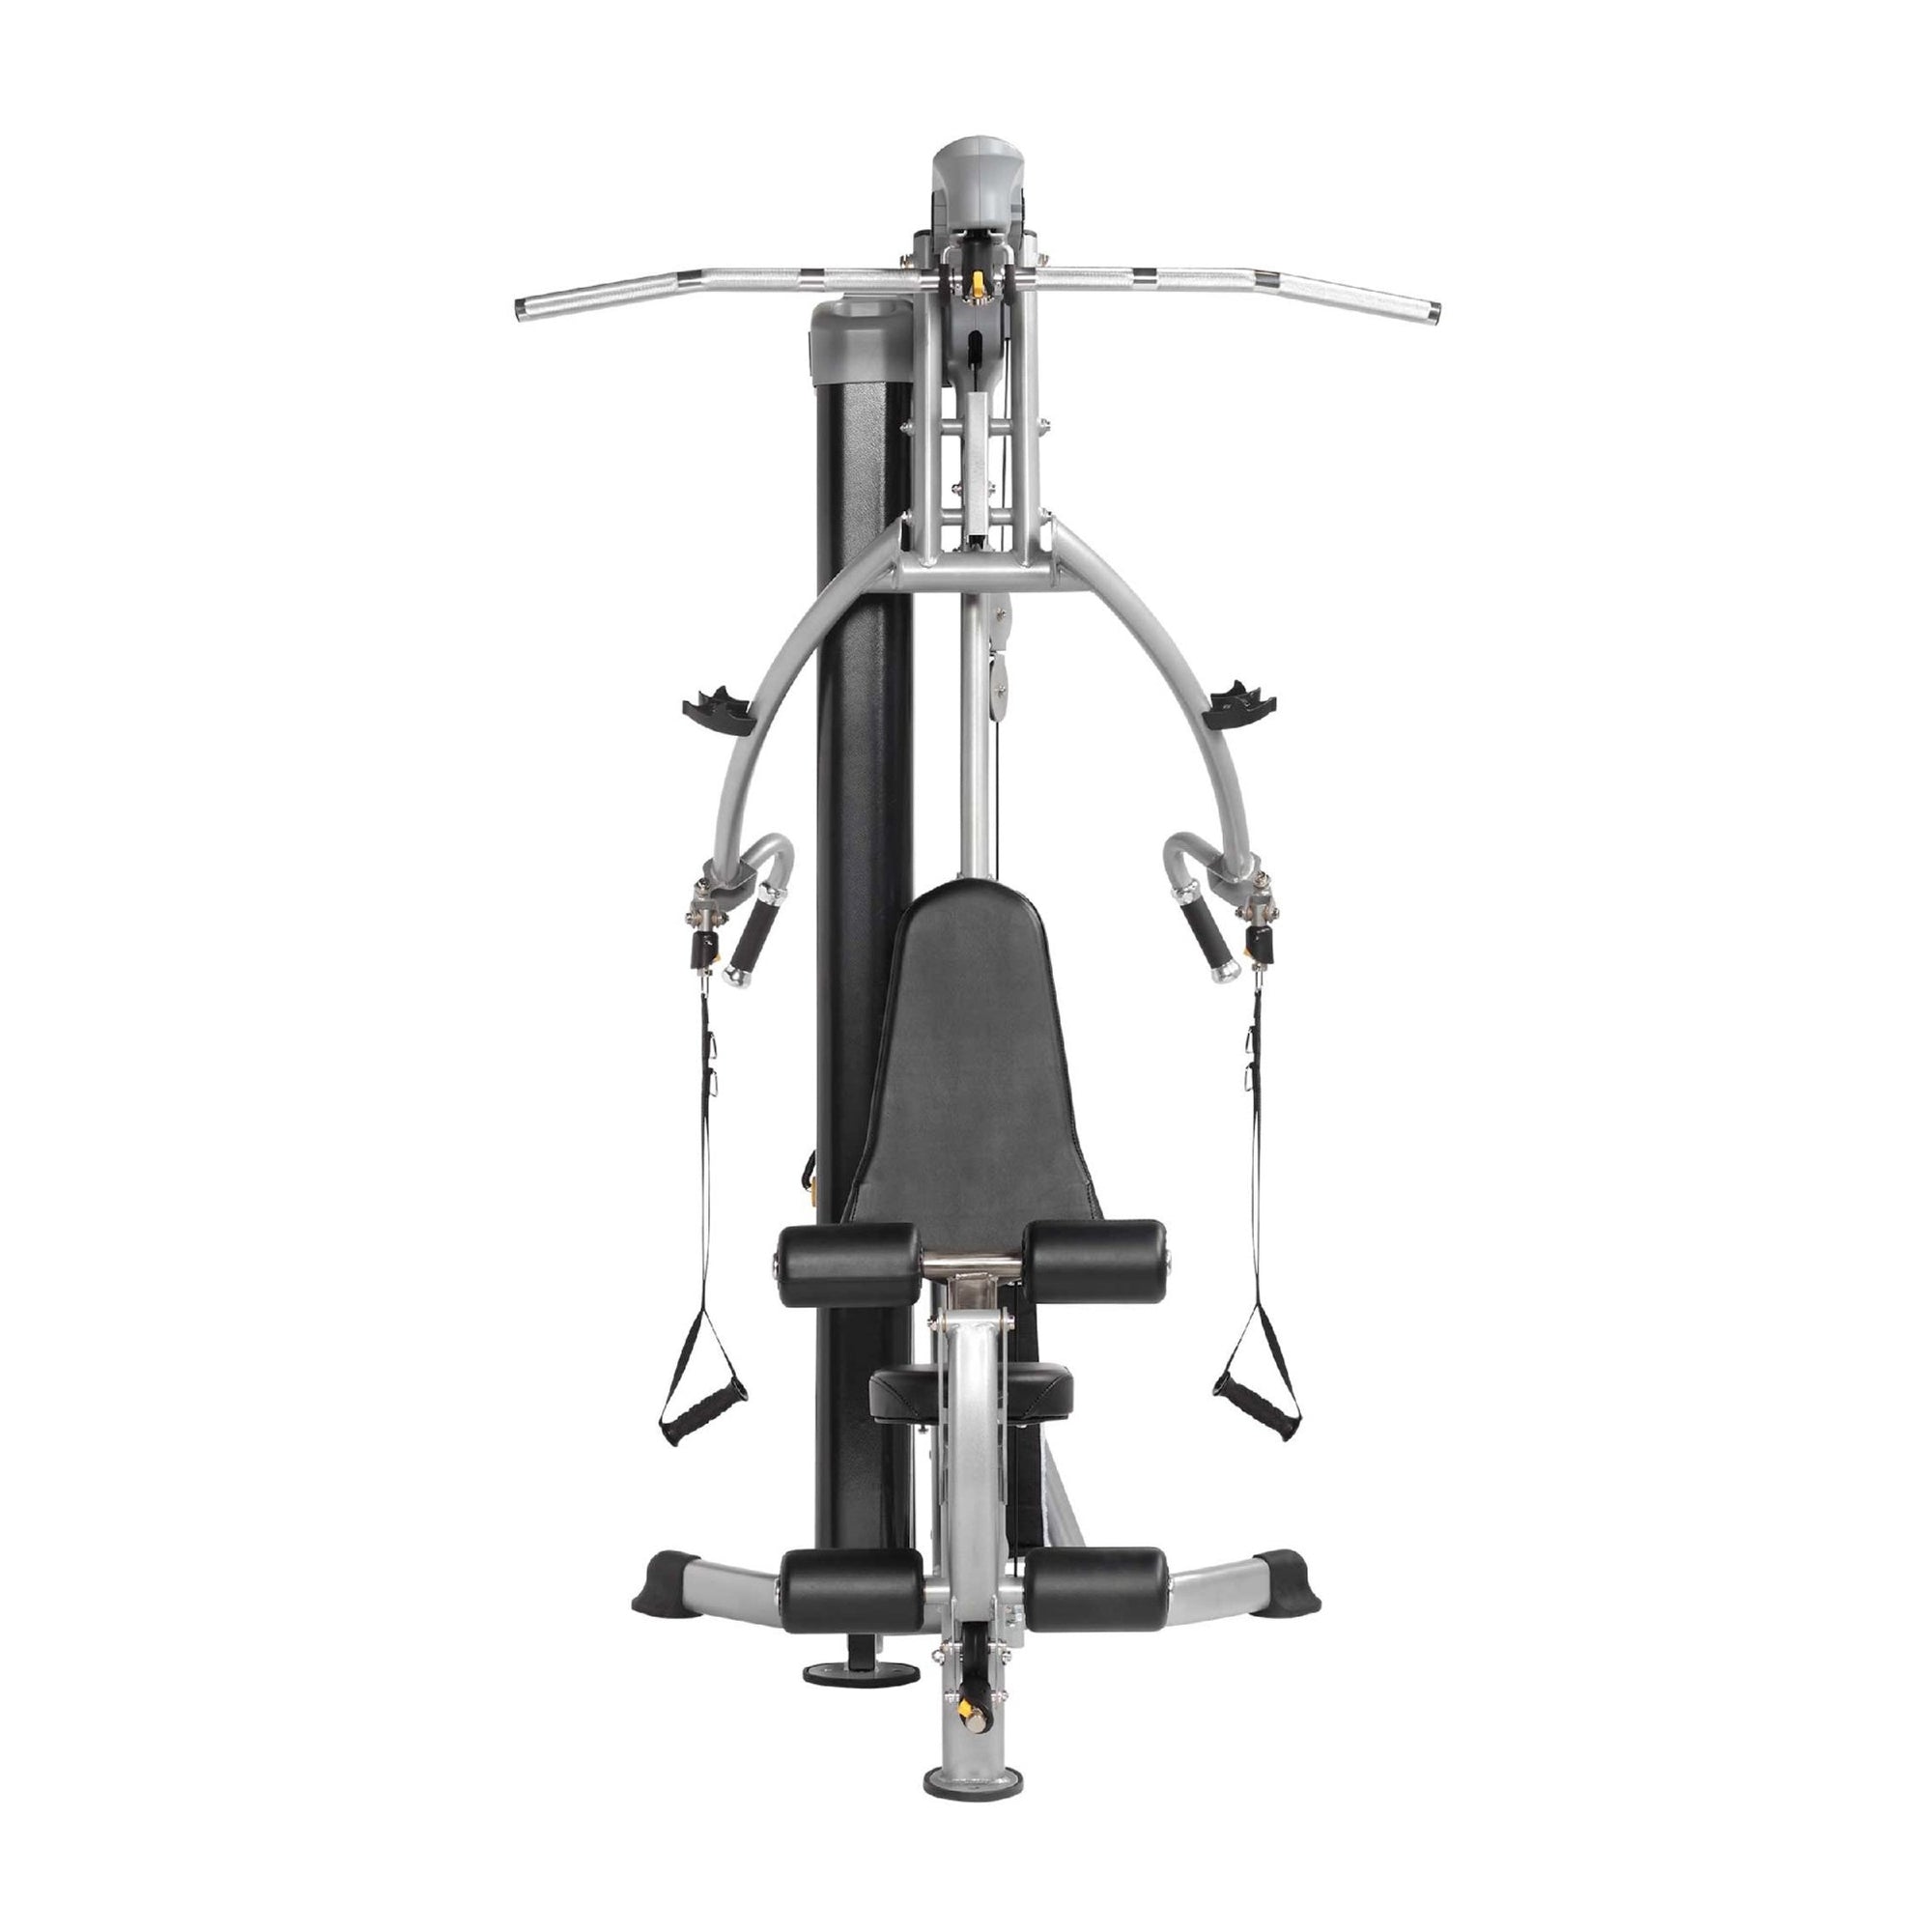 Hoist Fitness Equipment for sale in Canada - Tonic Performance